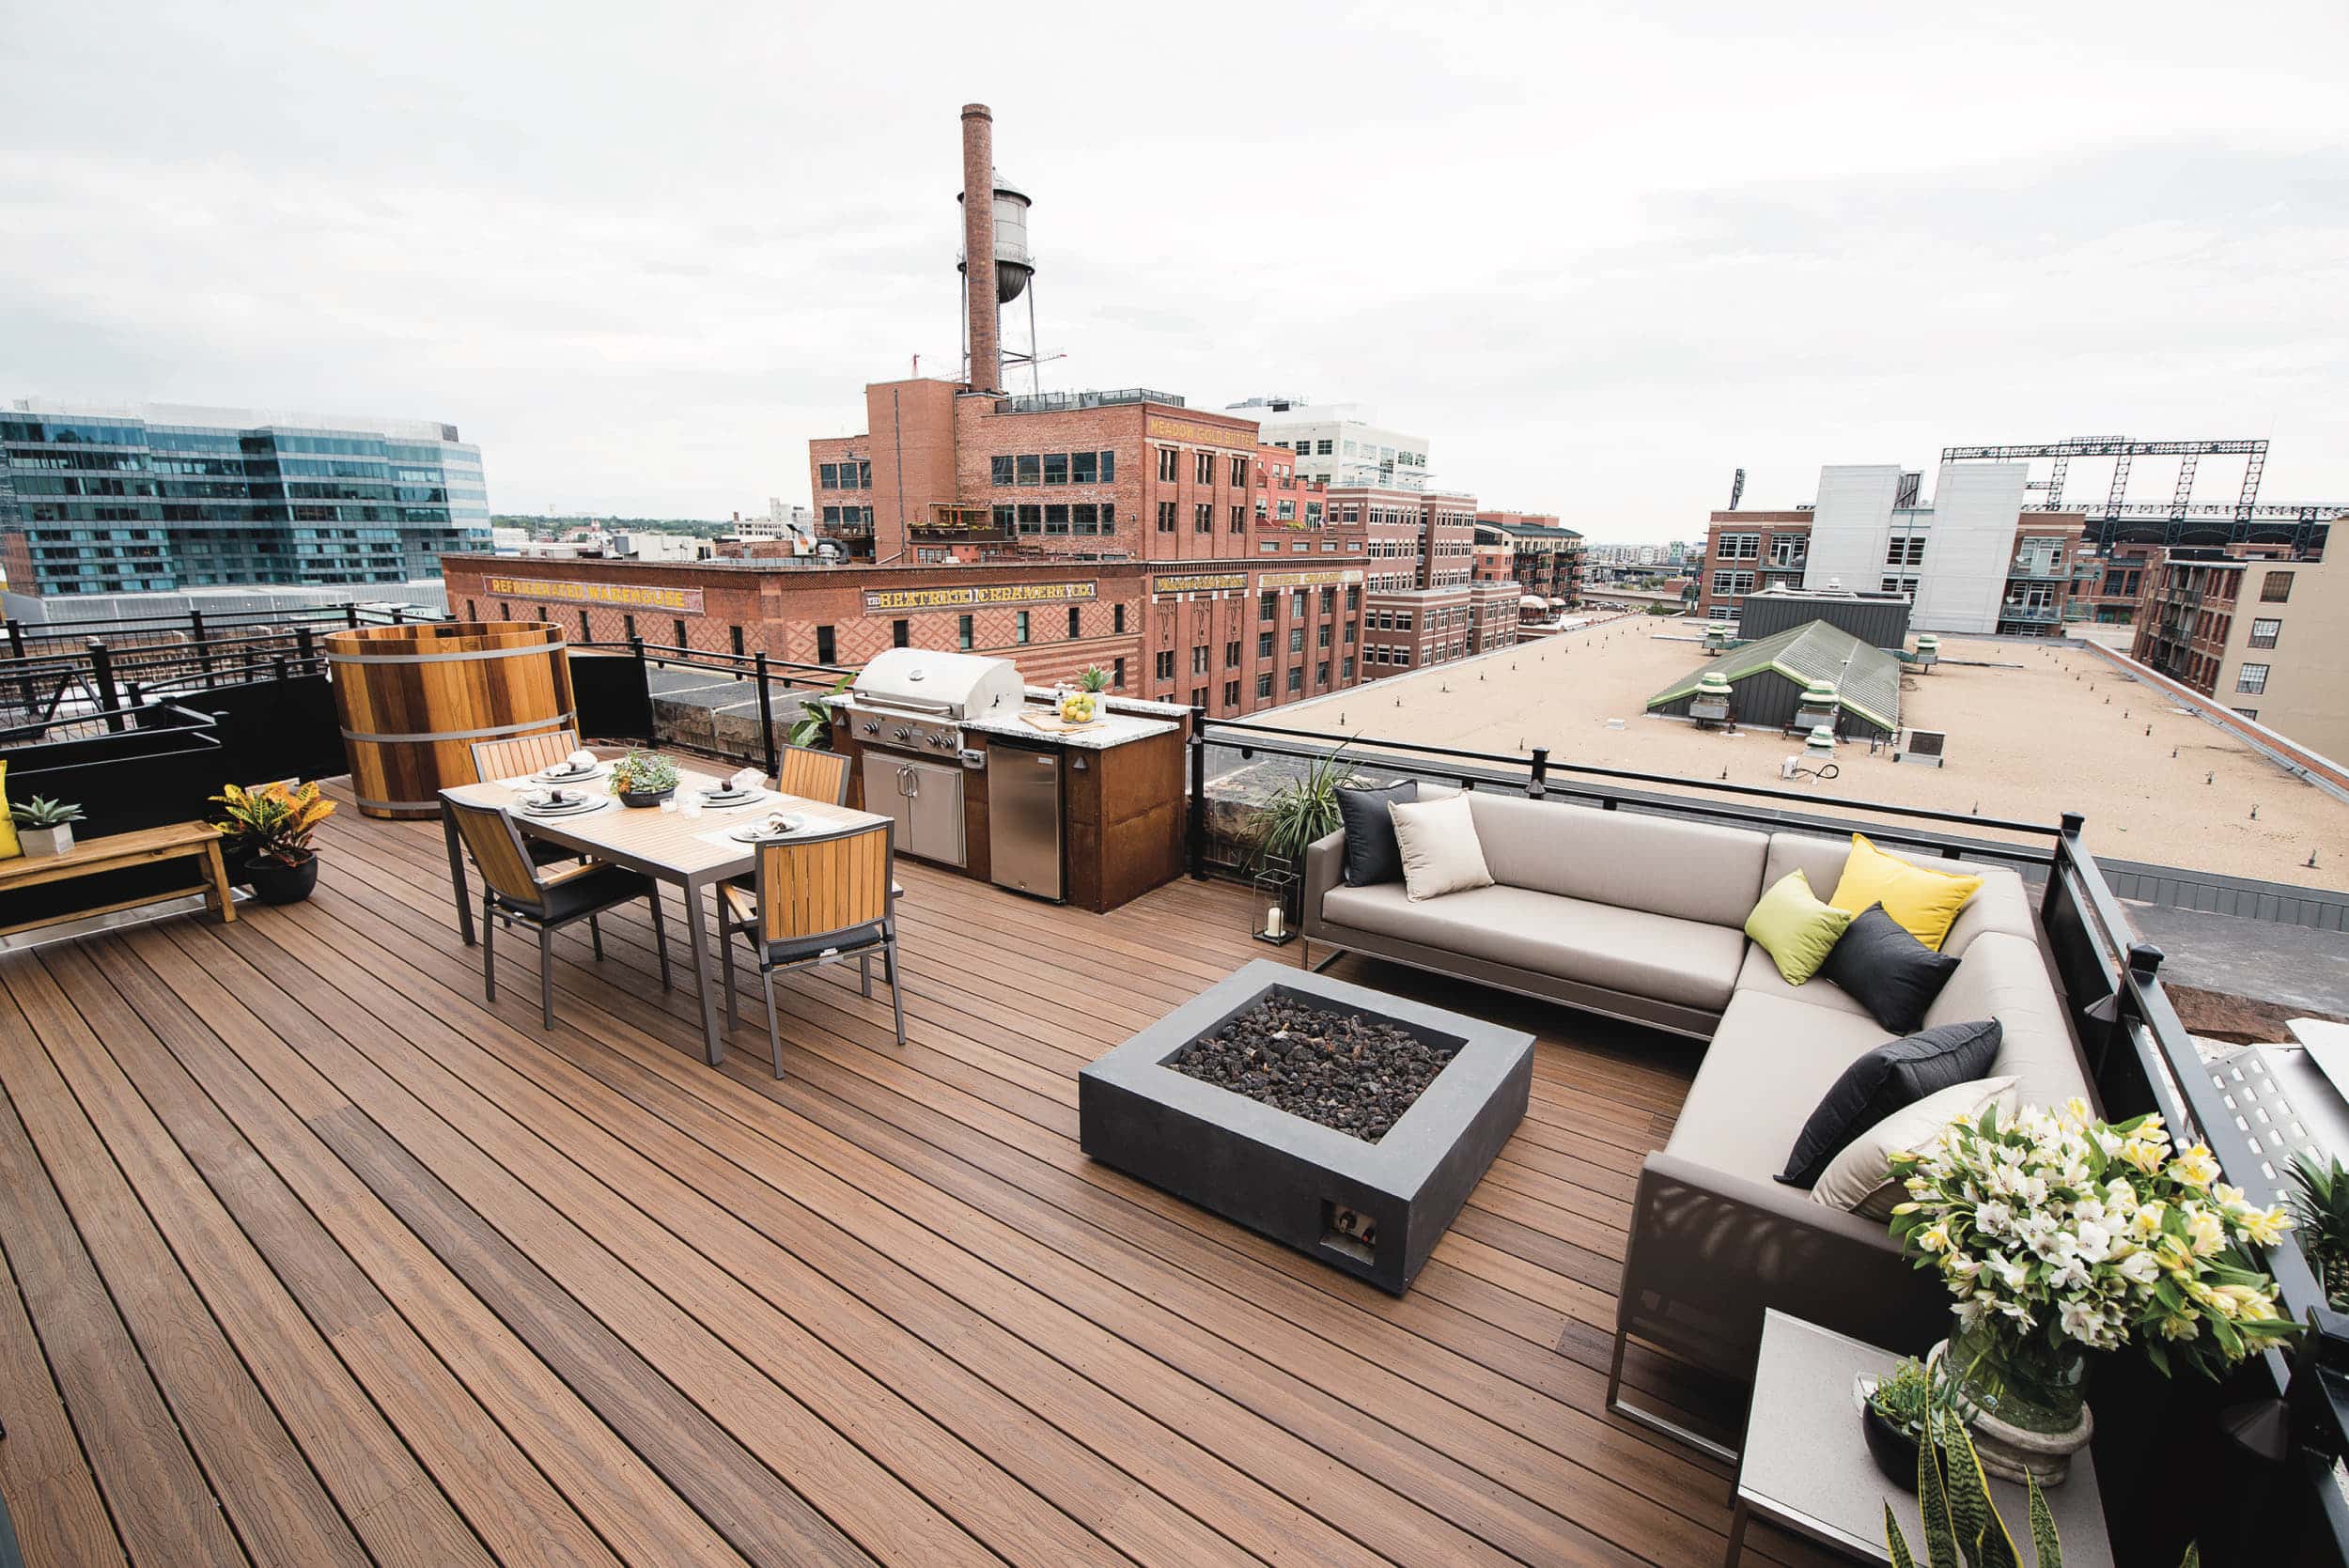 A rooftop deck with furniture and a fire pit.